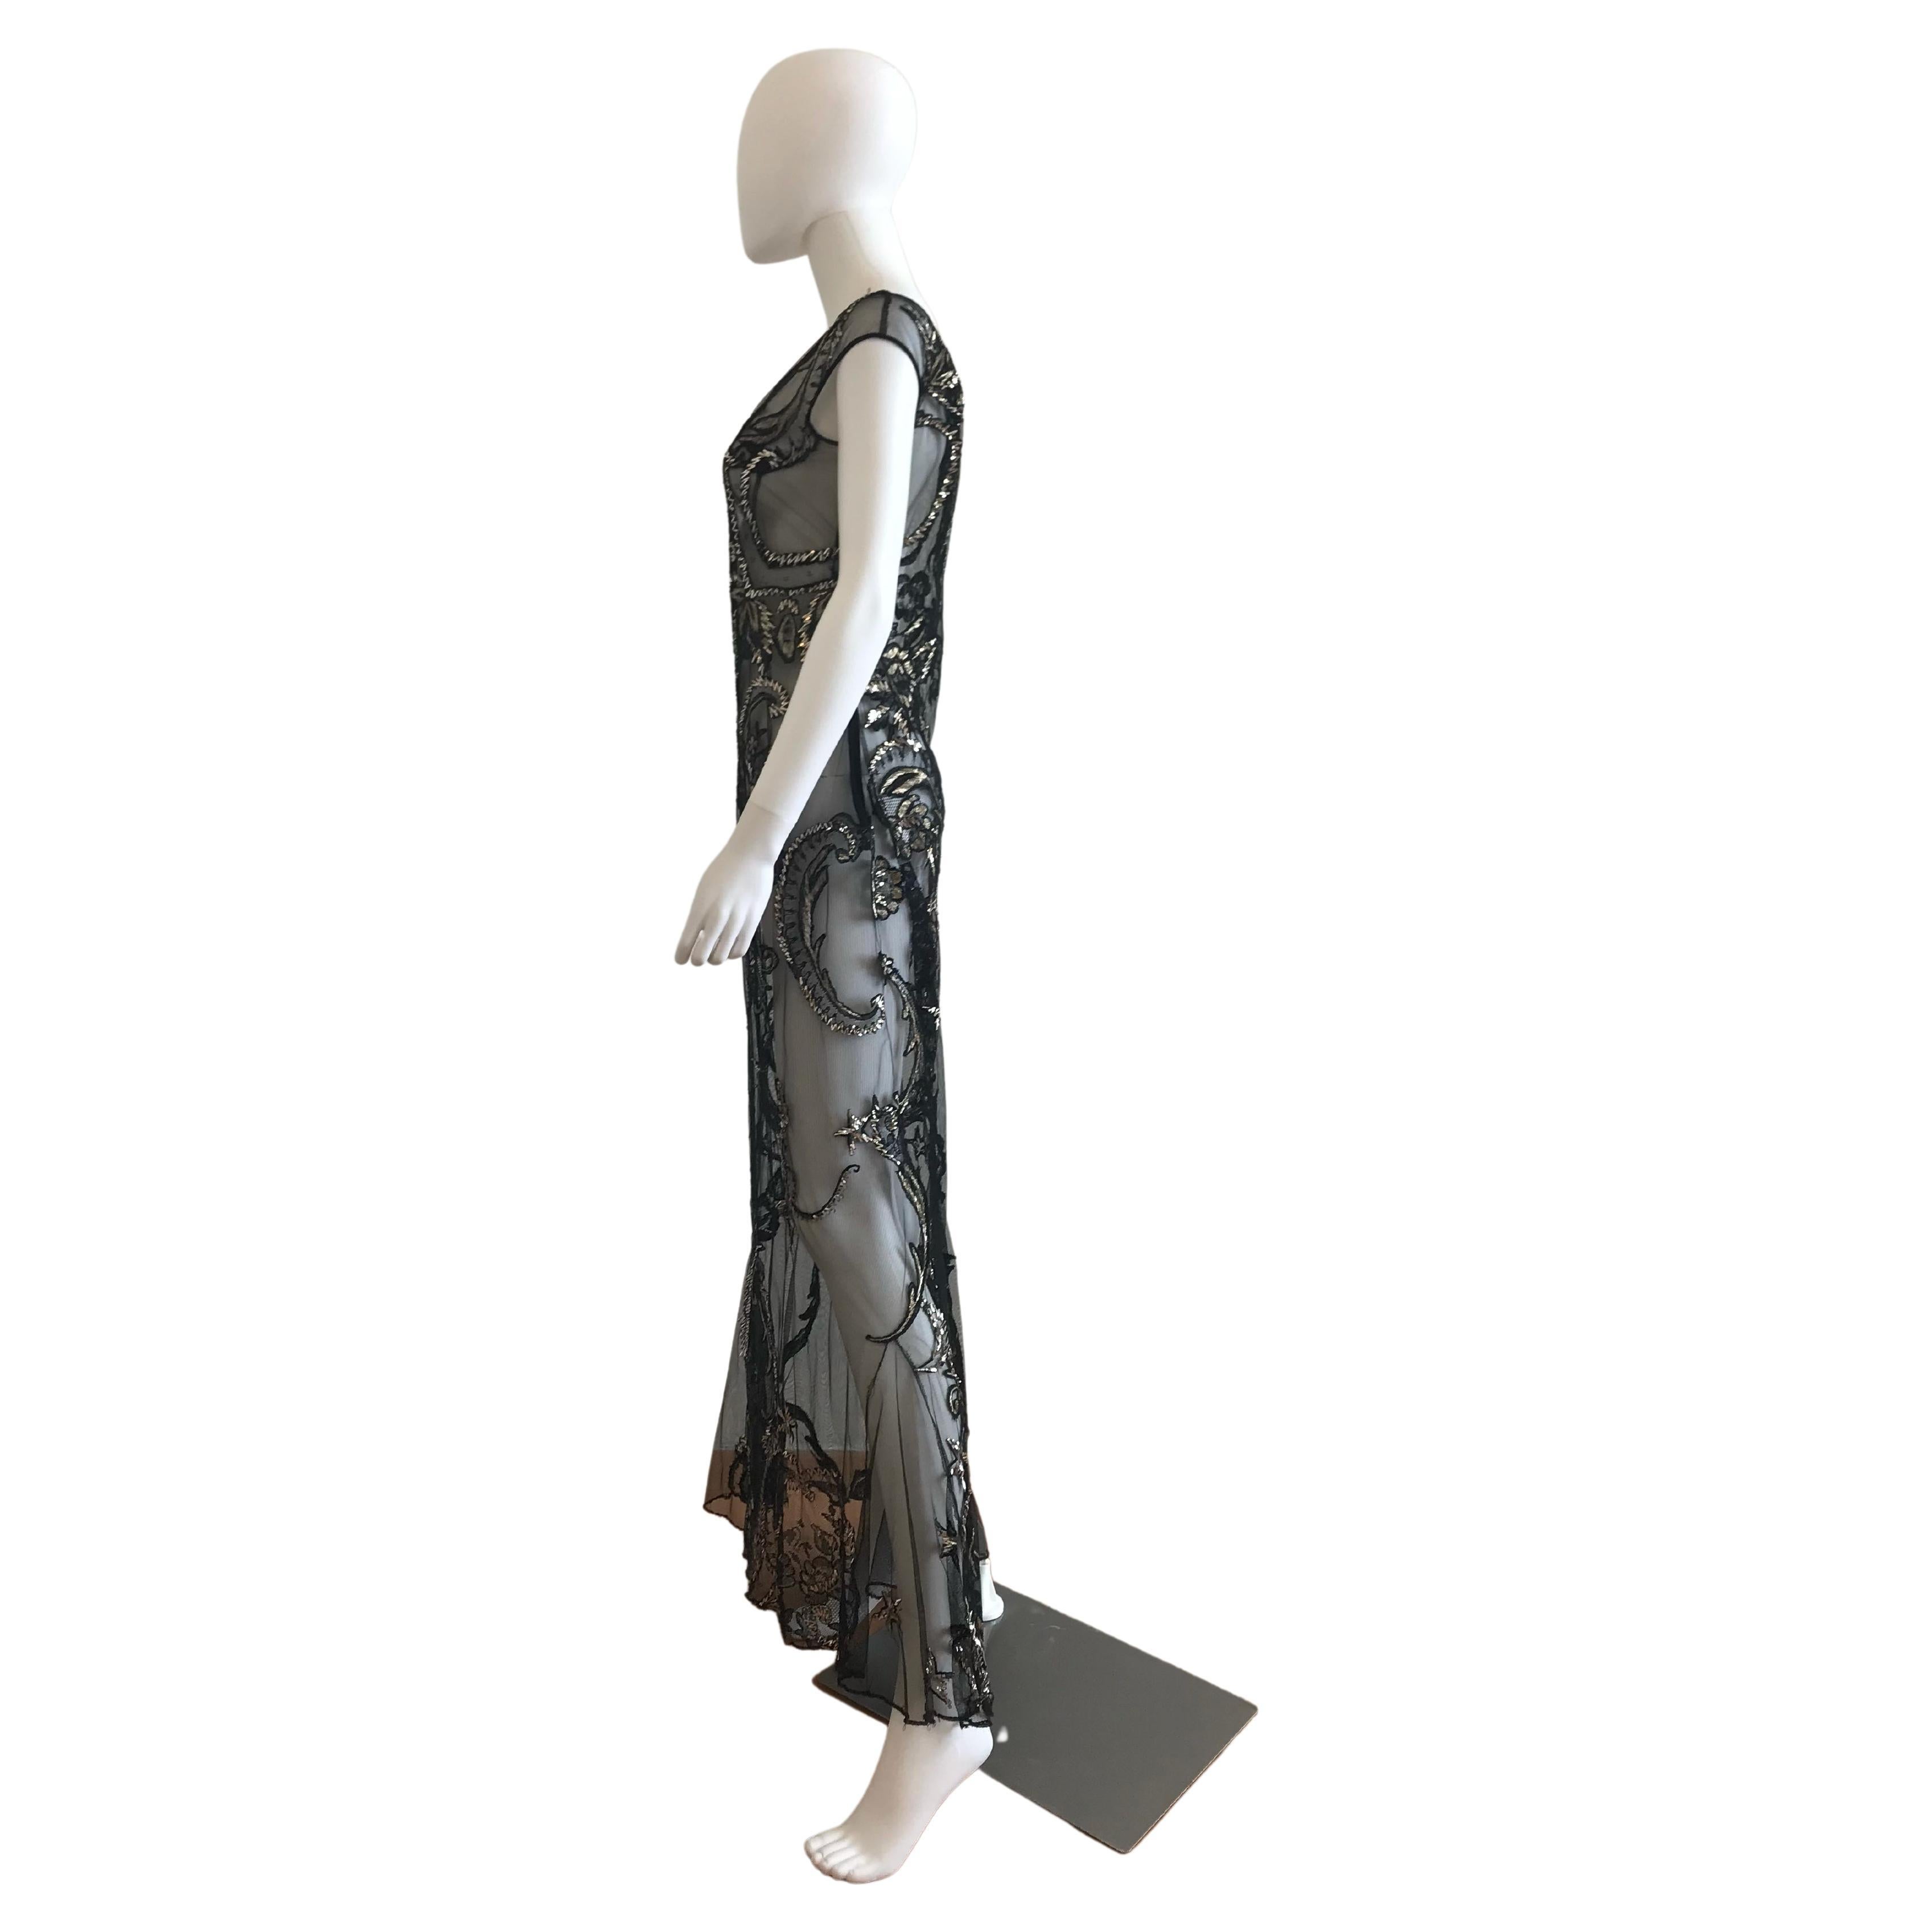 FW 1998 Gianfranco Ferre Metallic Embroidered Tulle Evening Gown For Sale 8